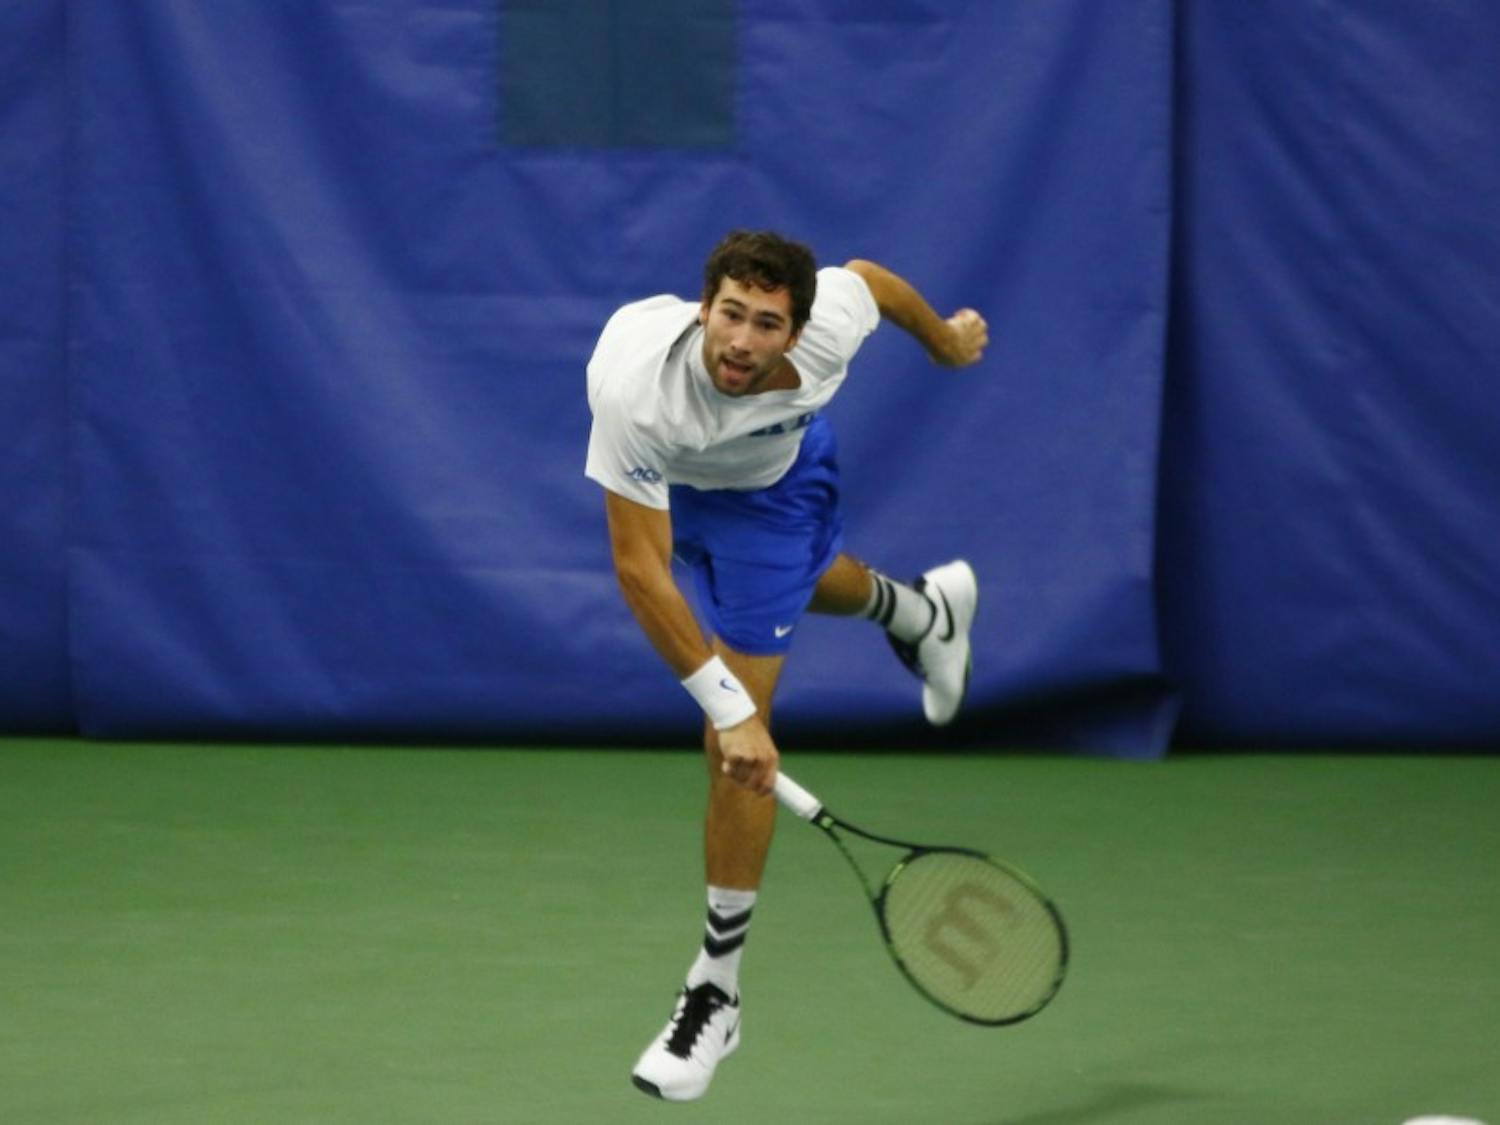 Freshman Catalin Mateas knocked off a ranked opponent Sunday and will look to continue the momentum when the Blue Devils host No. 7 Illinois Friday.